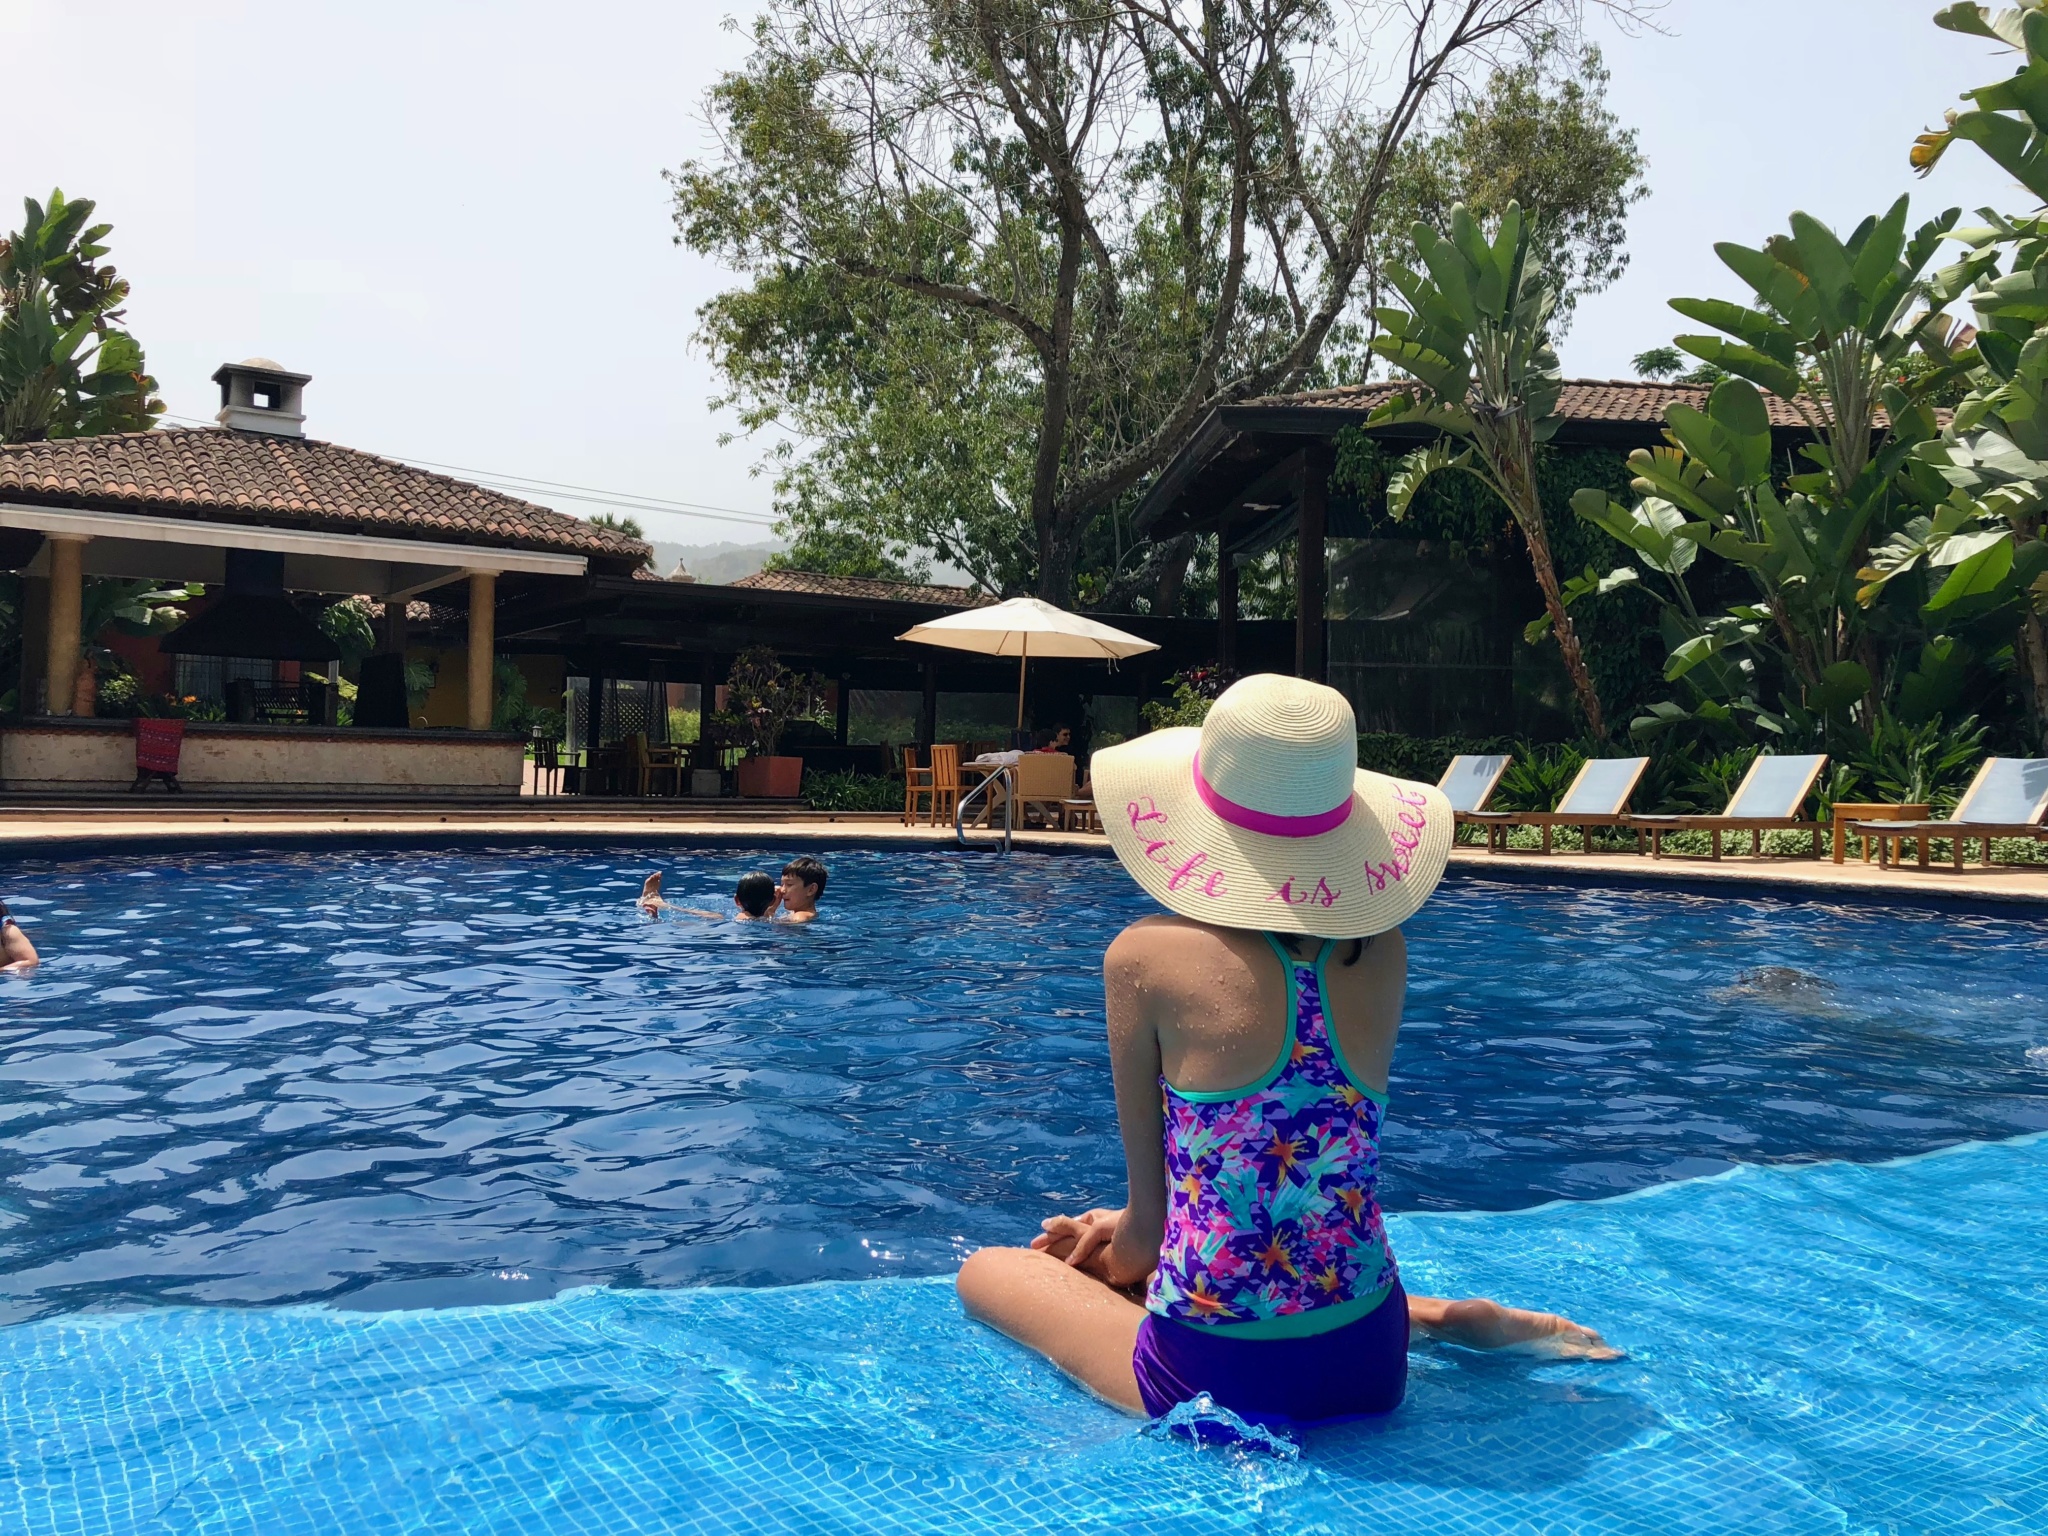 The Best Hotel For Families in Antigua Guatemala